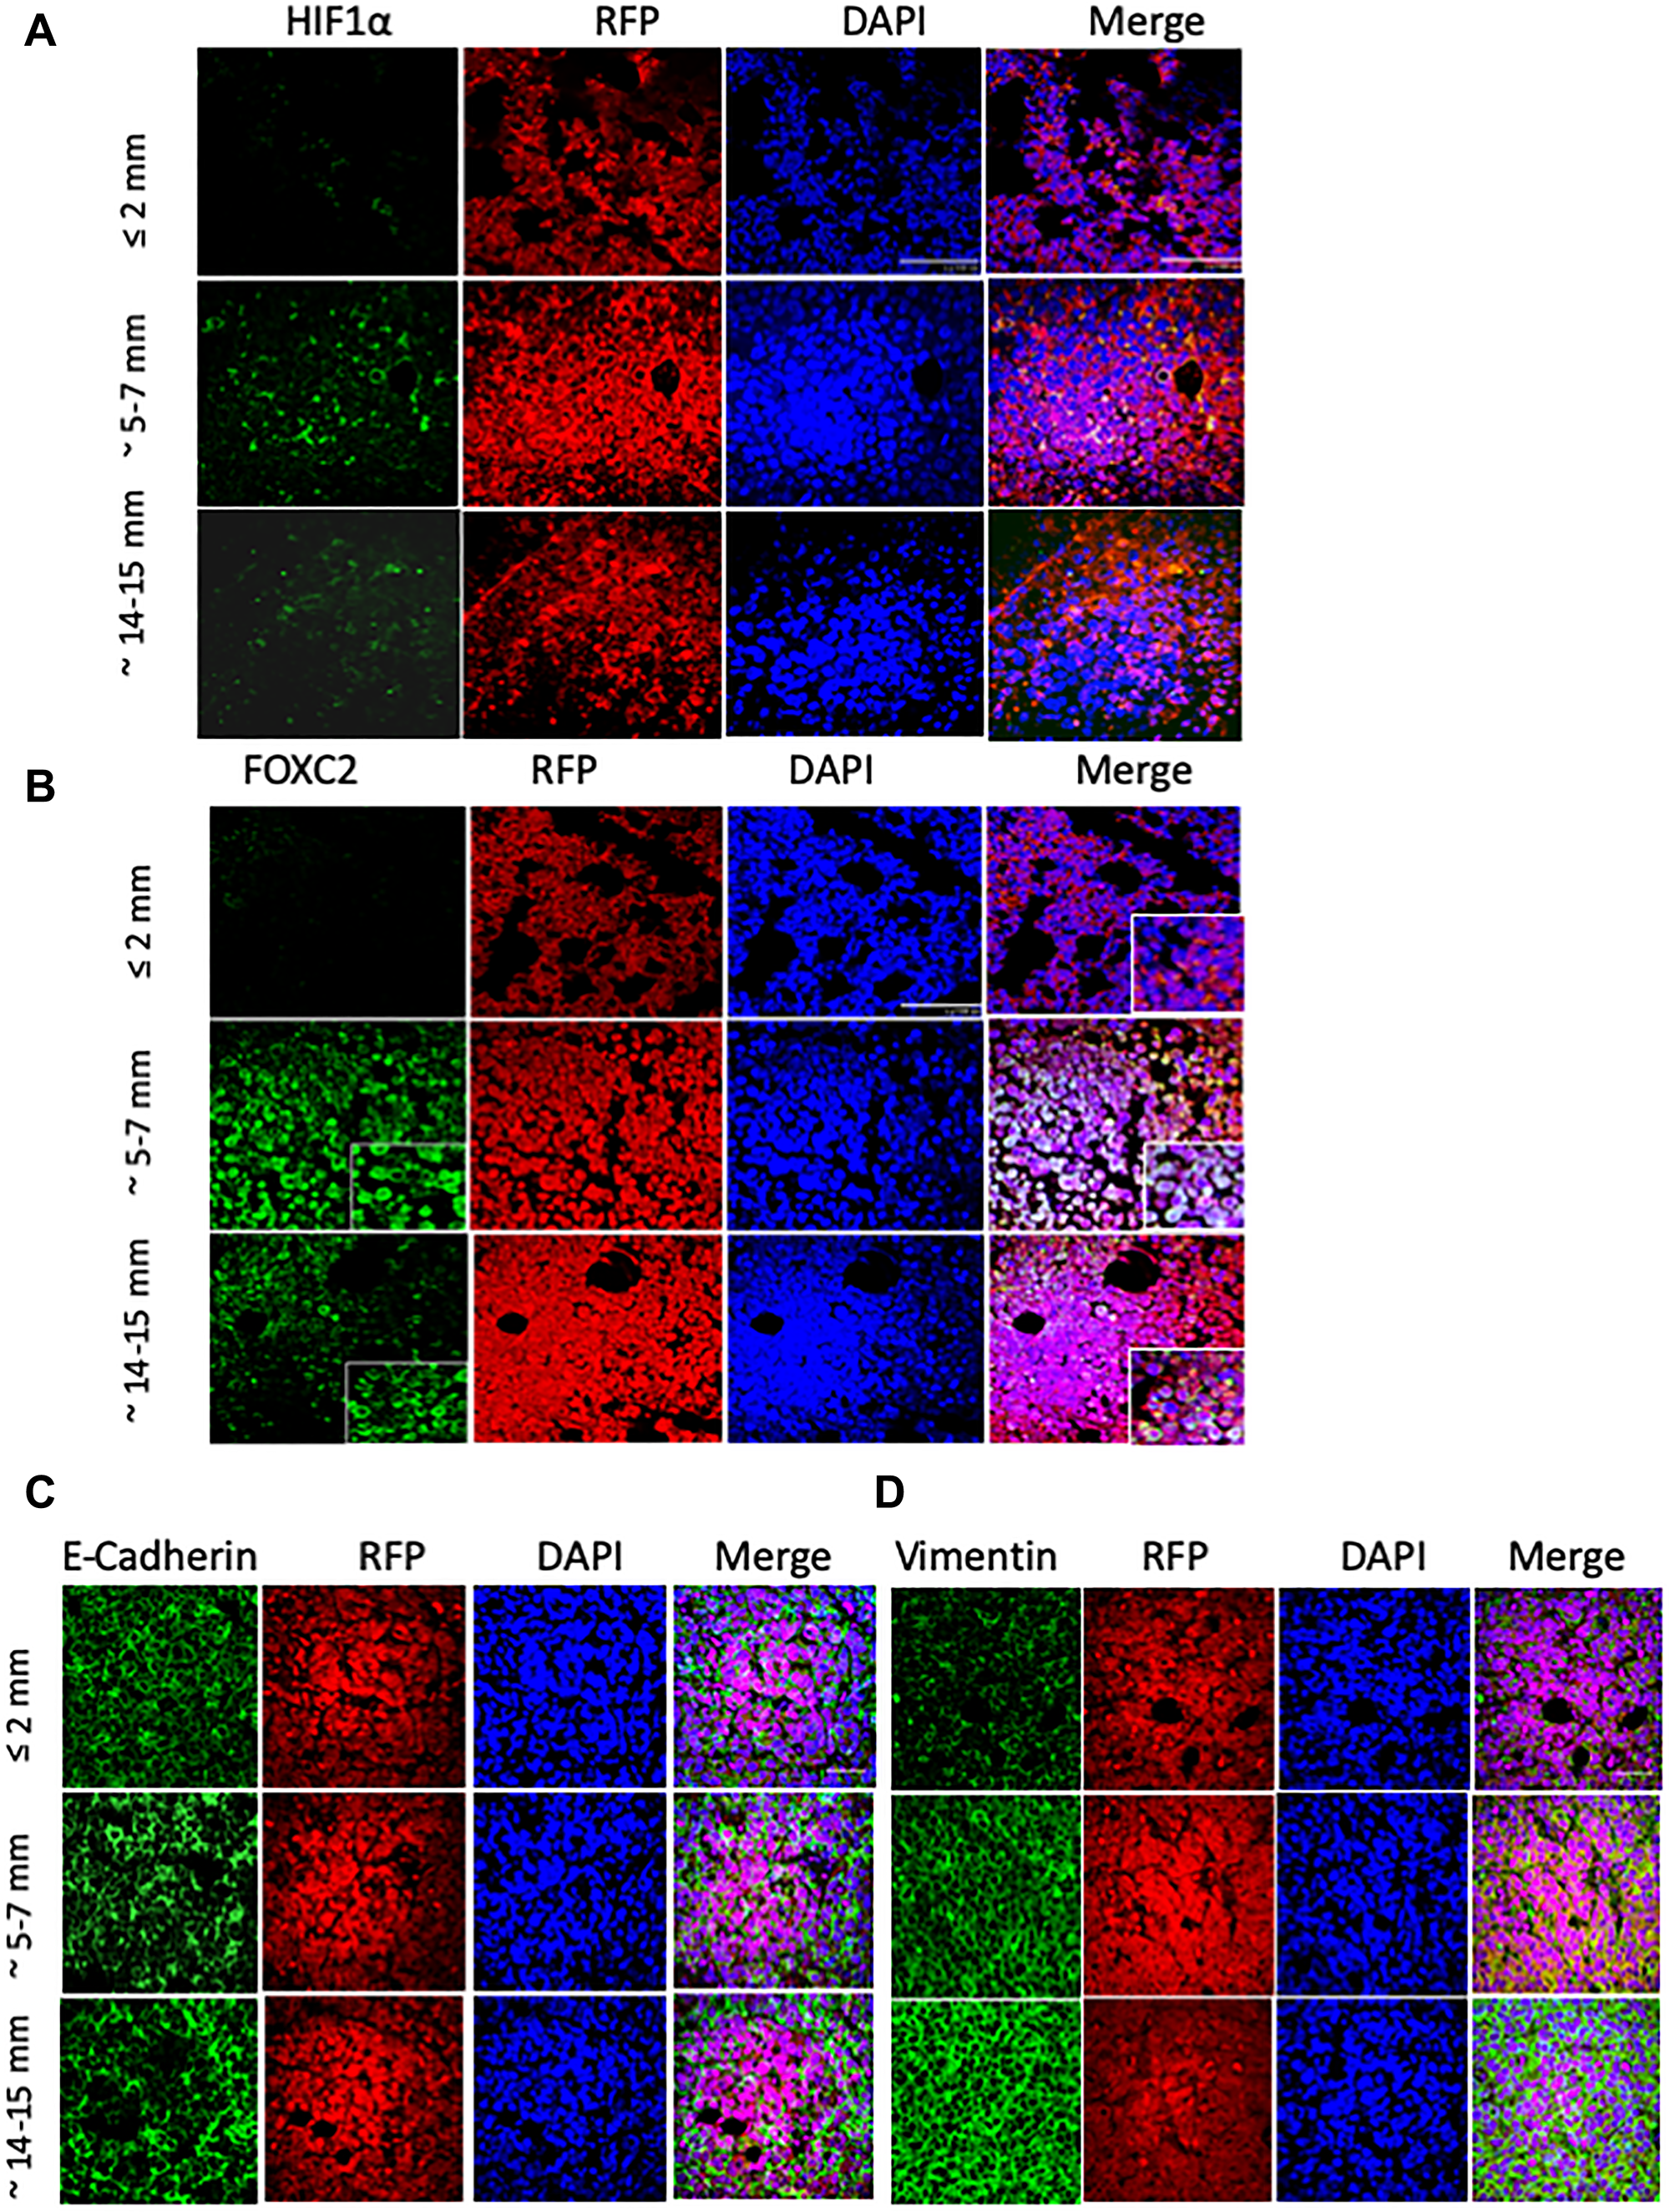 MCF-7 tumor outgrowth is accompanied by increased expression of markers of EMT and hypoxia.